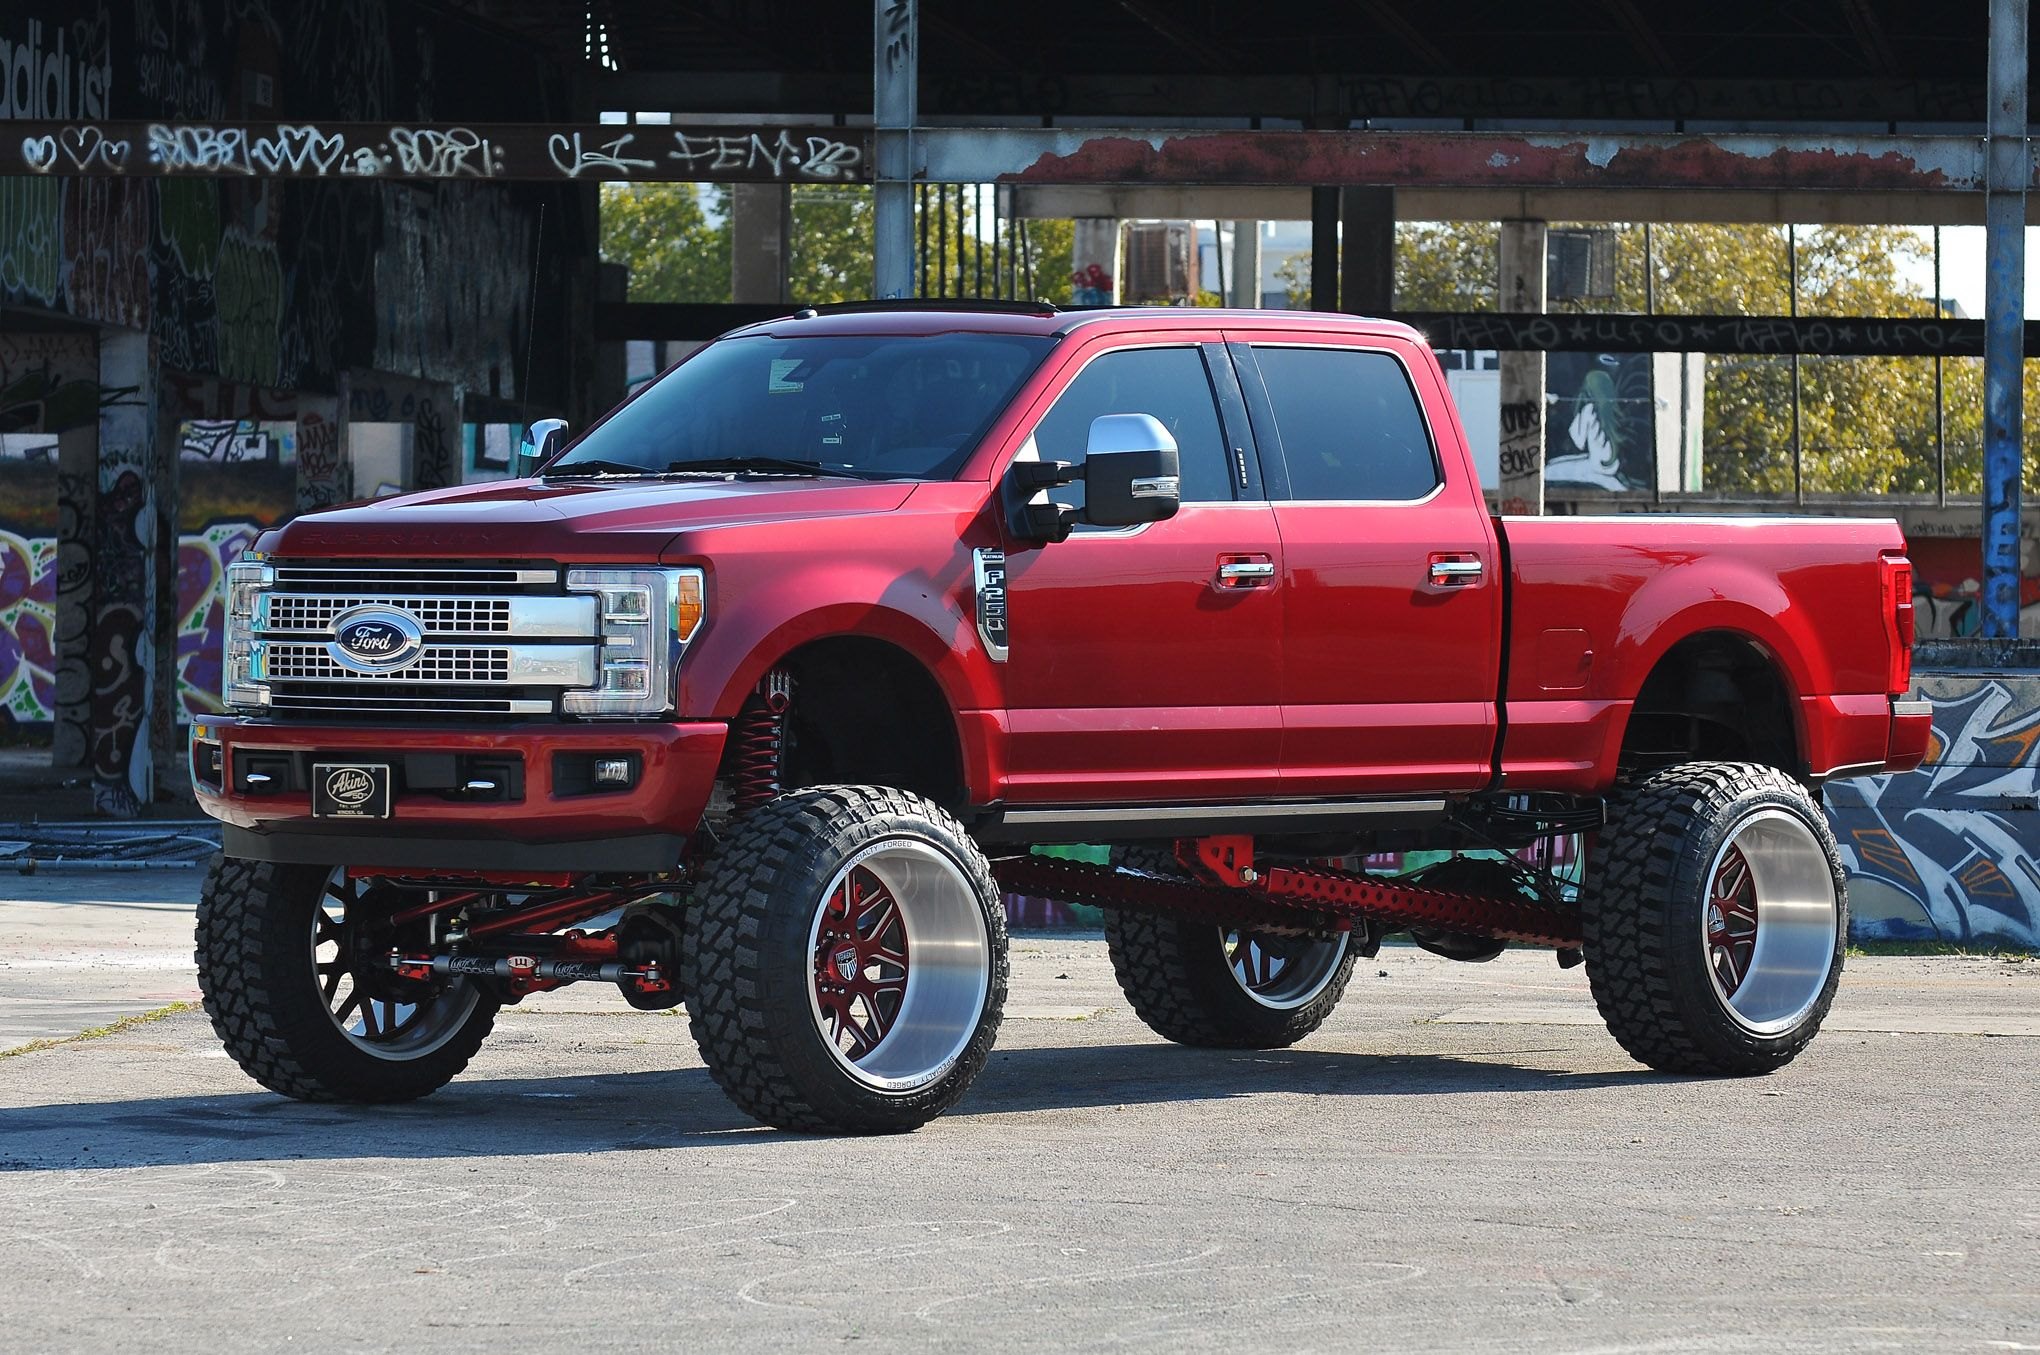 Red Lifted Ford F-250 with Chrome Mesh Grille - Photo by Phil Gordon